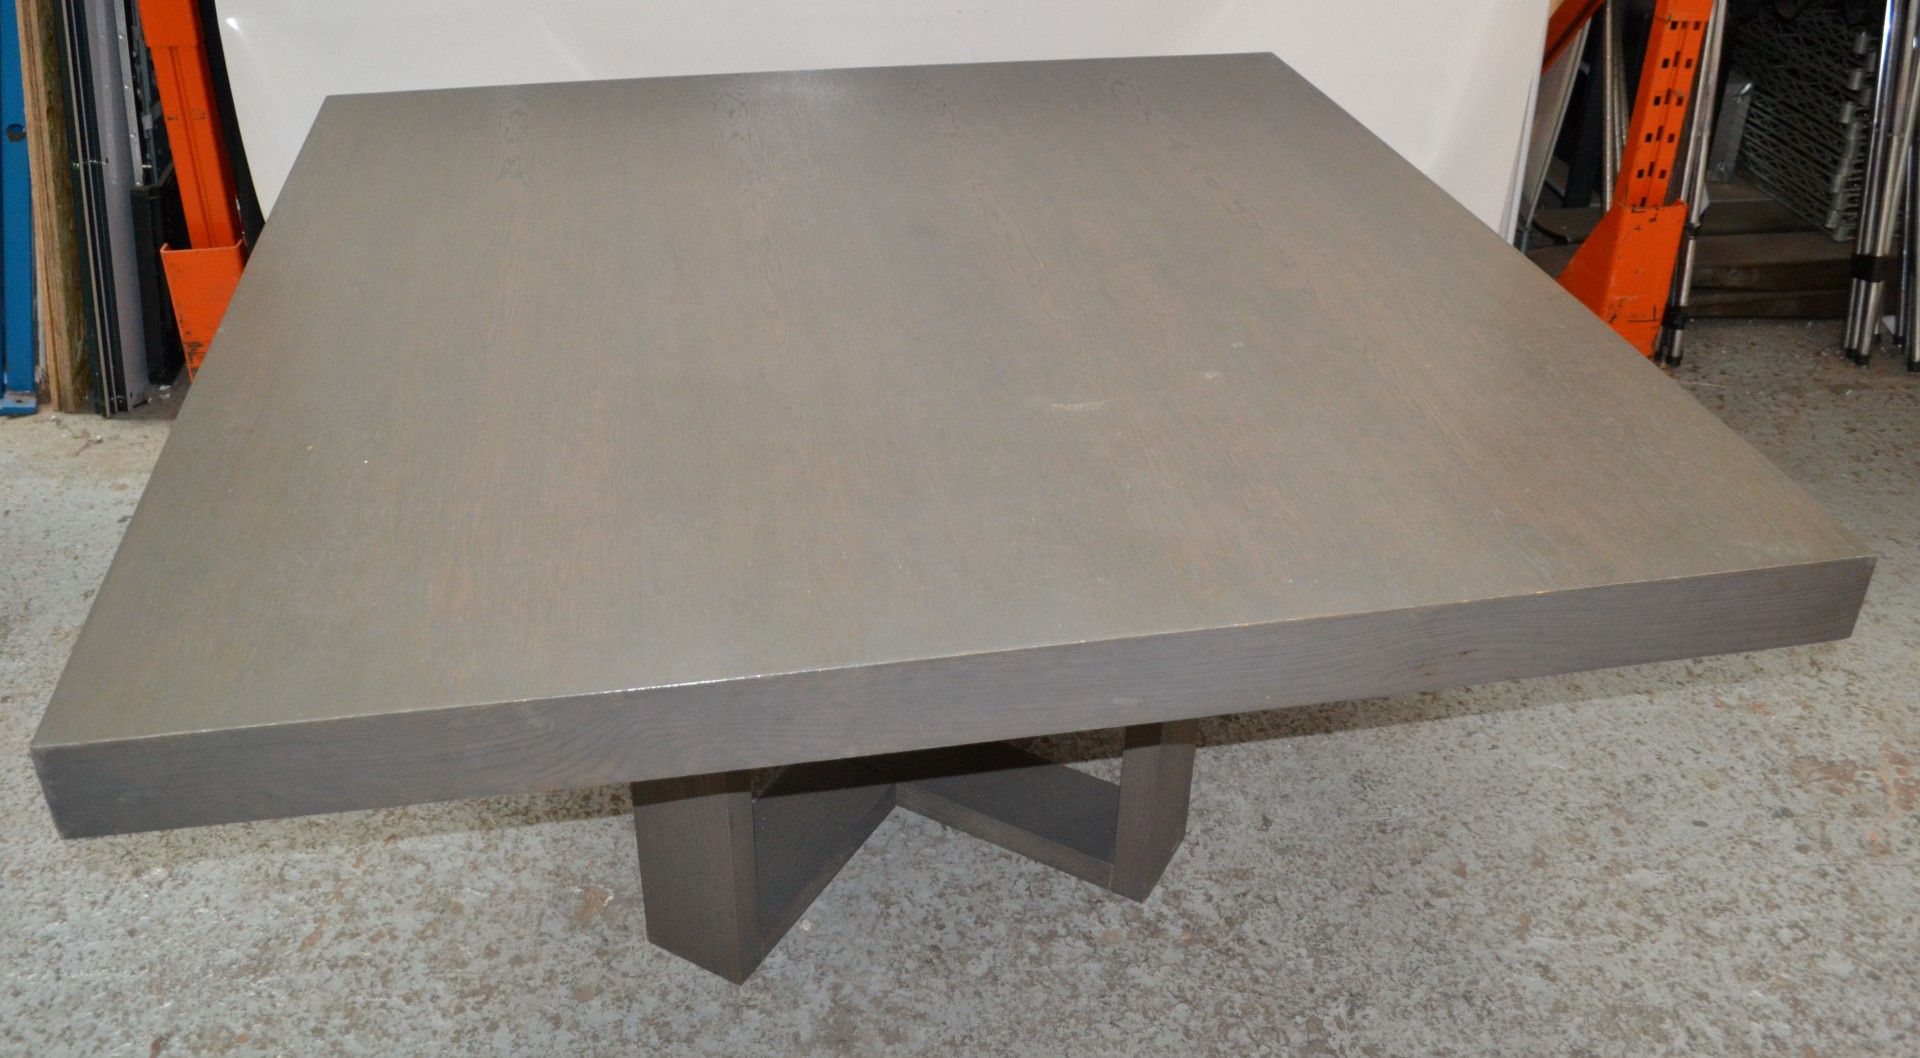 1 x Large Square Wooden Table in Grey Oak Coloured Finish - CL314 - Location: Altrincham WA14 - *NO - Image 3 of 10